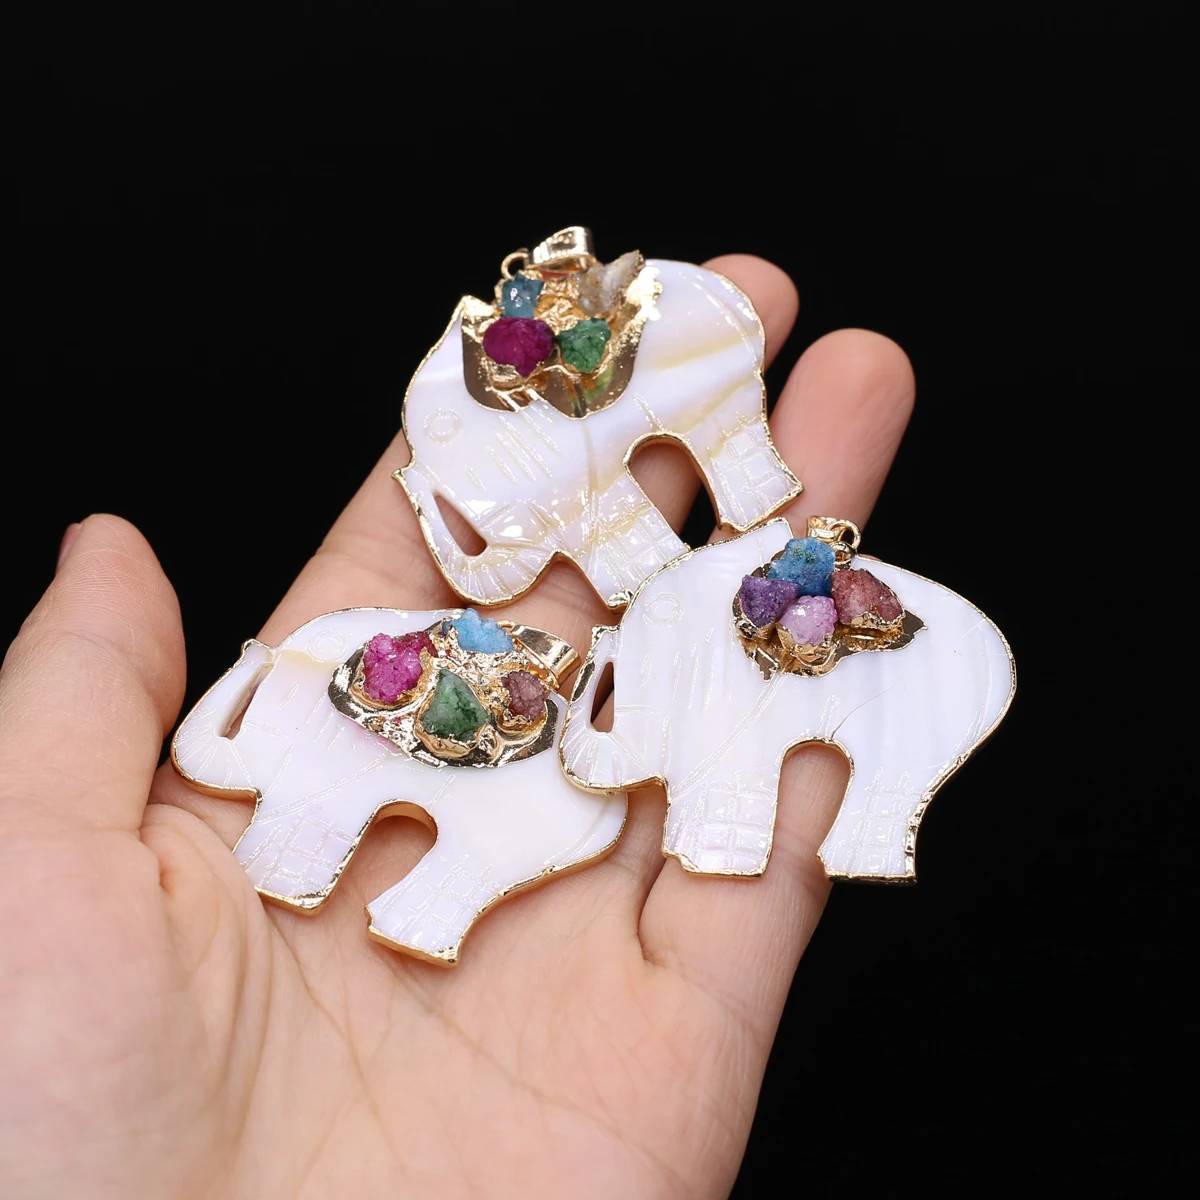 

Natural White Shell Elephant Pendant Inlaid Gem Crafts Animal Jewelry Making DIY Necklace Earring Accessories Gift Party 45x47mm